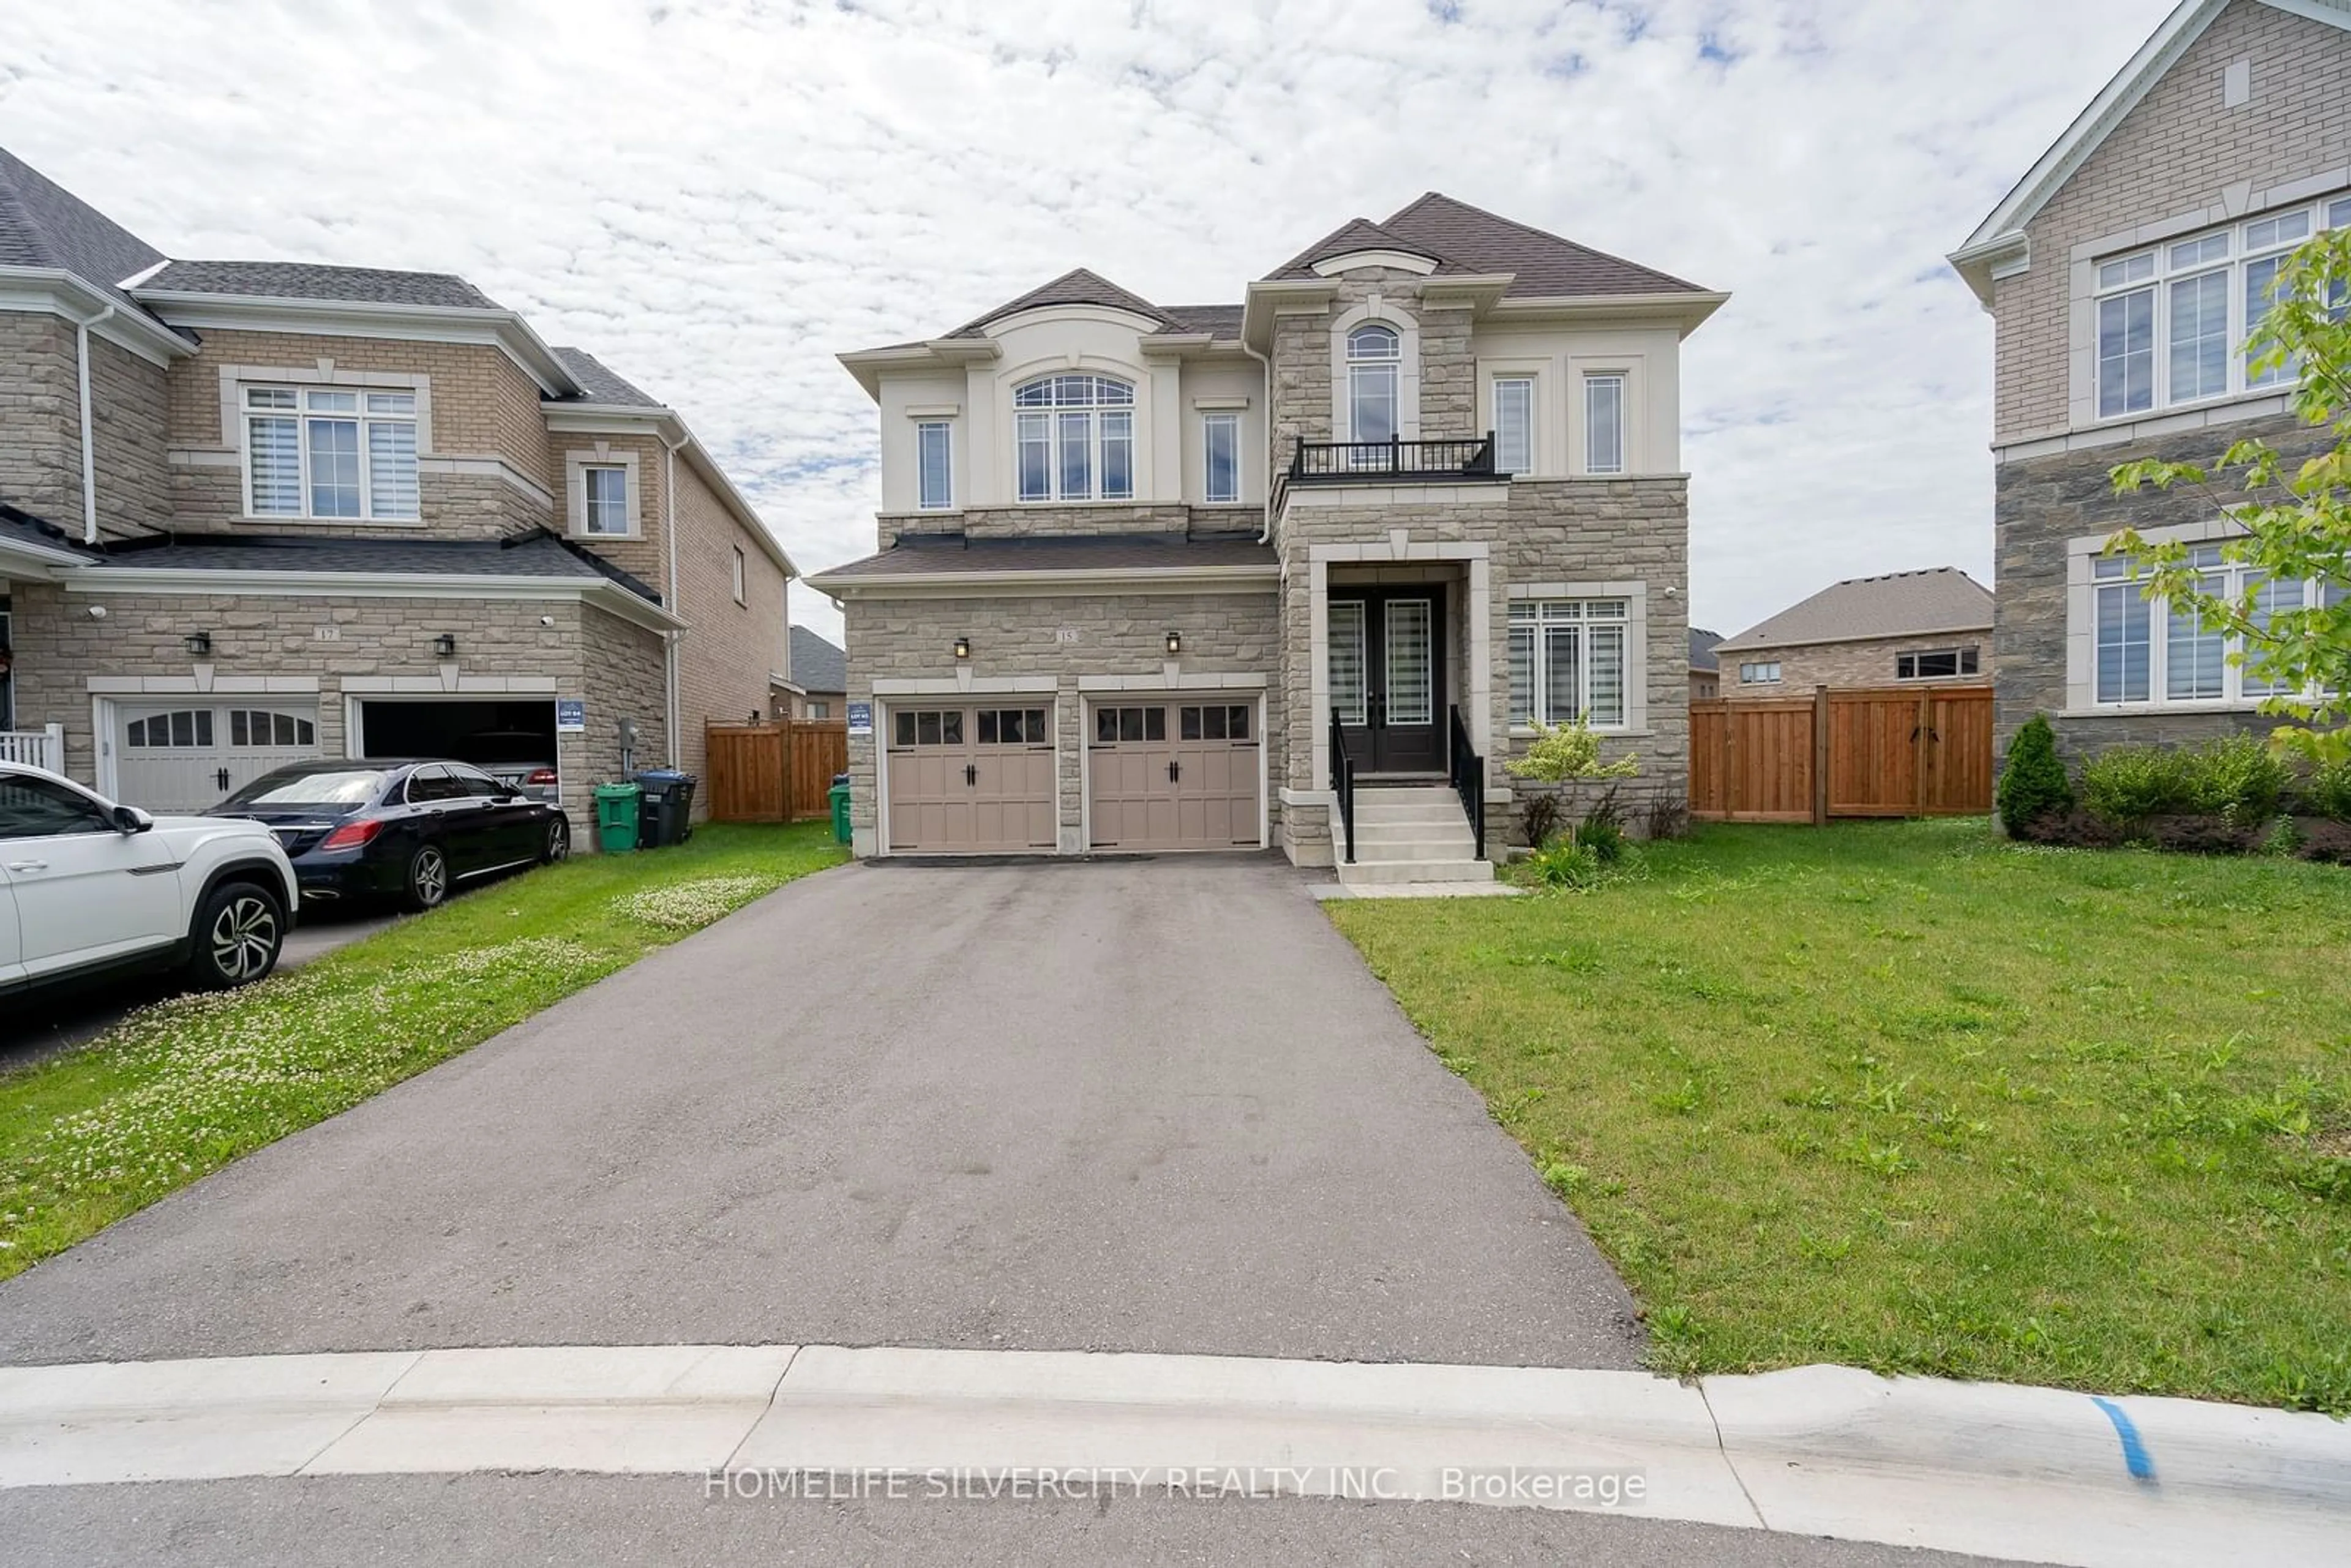 Frontside or backside of a home for 15 Moonstruck St, Caledon Ontario L7C 3A3